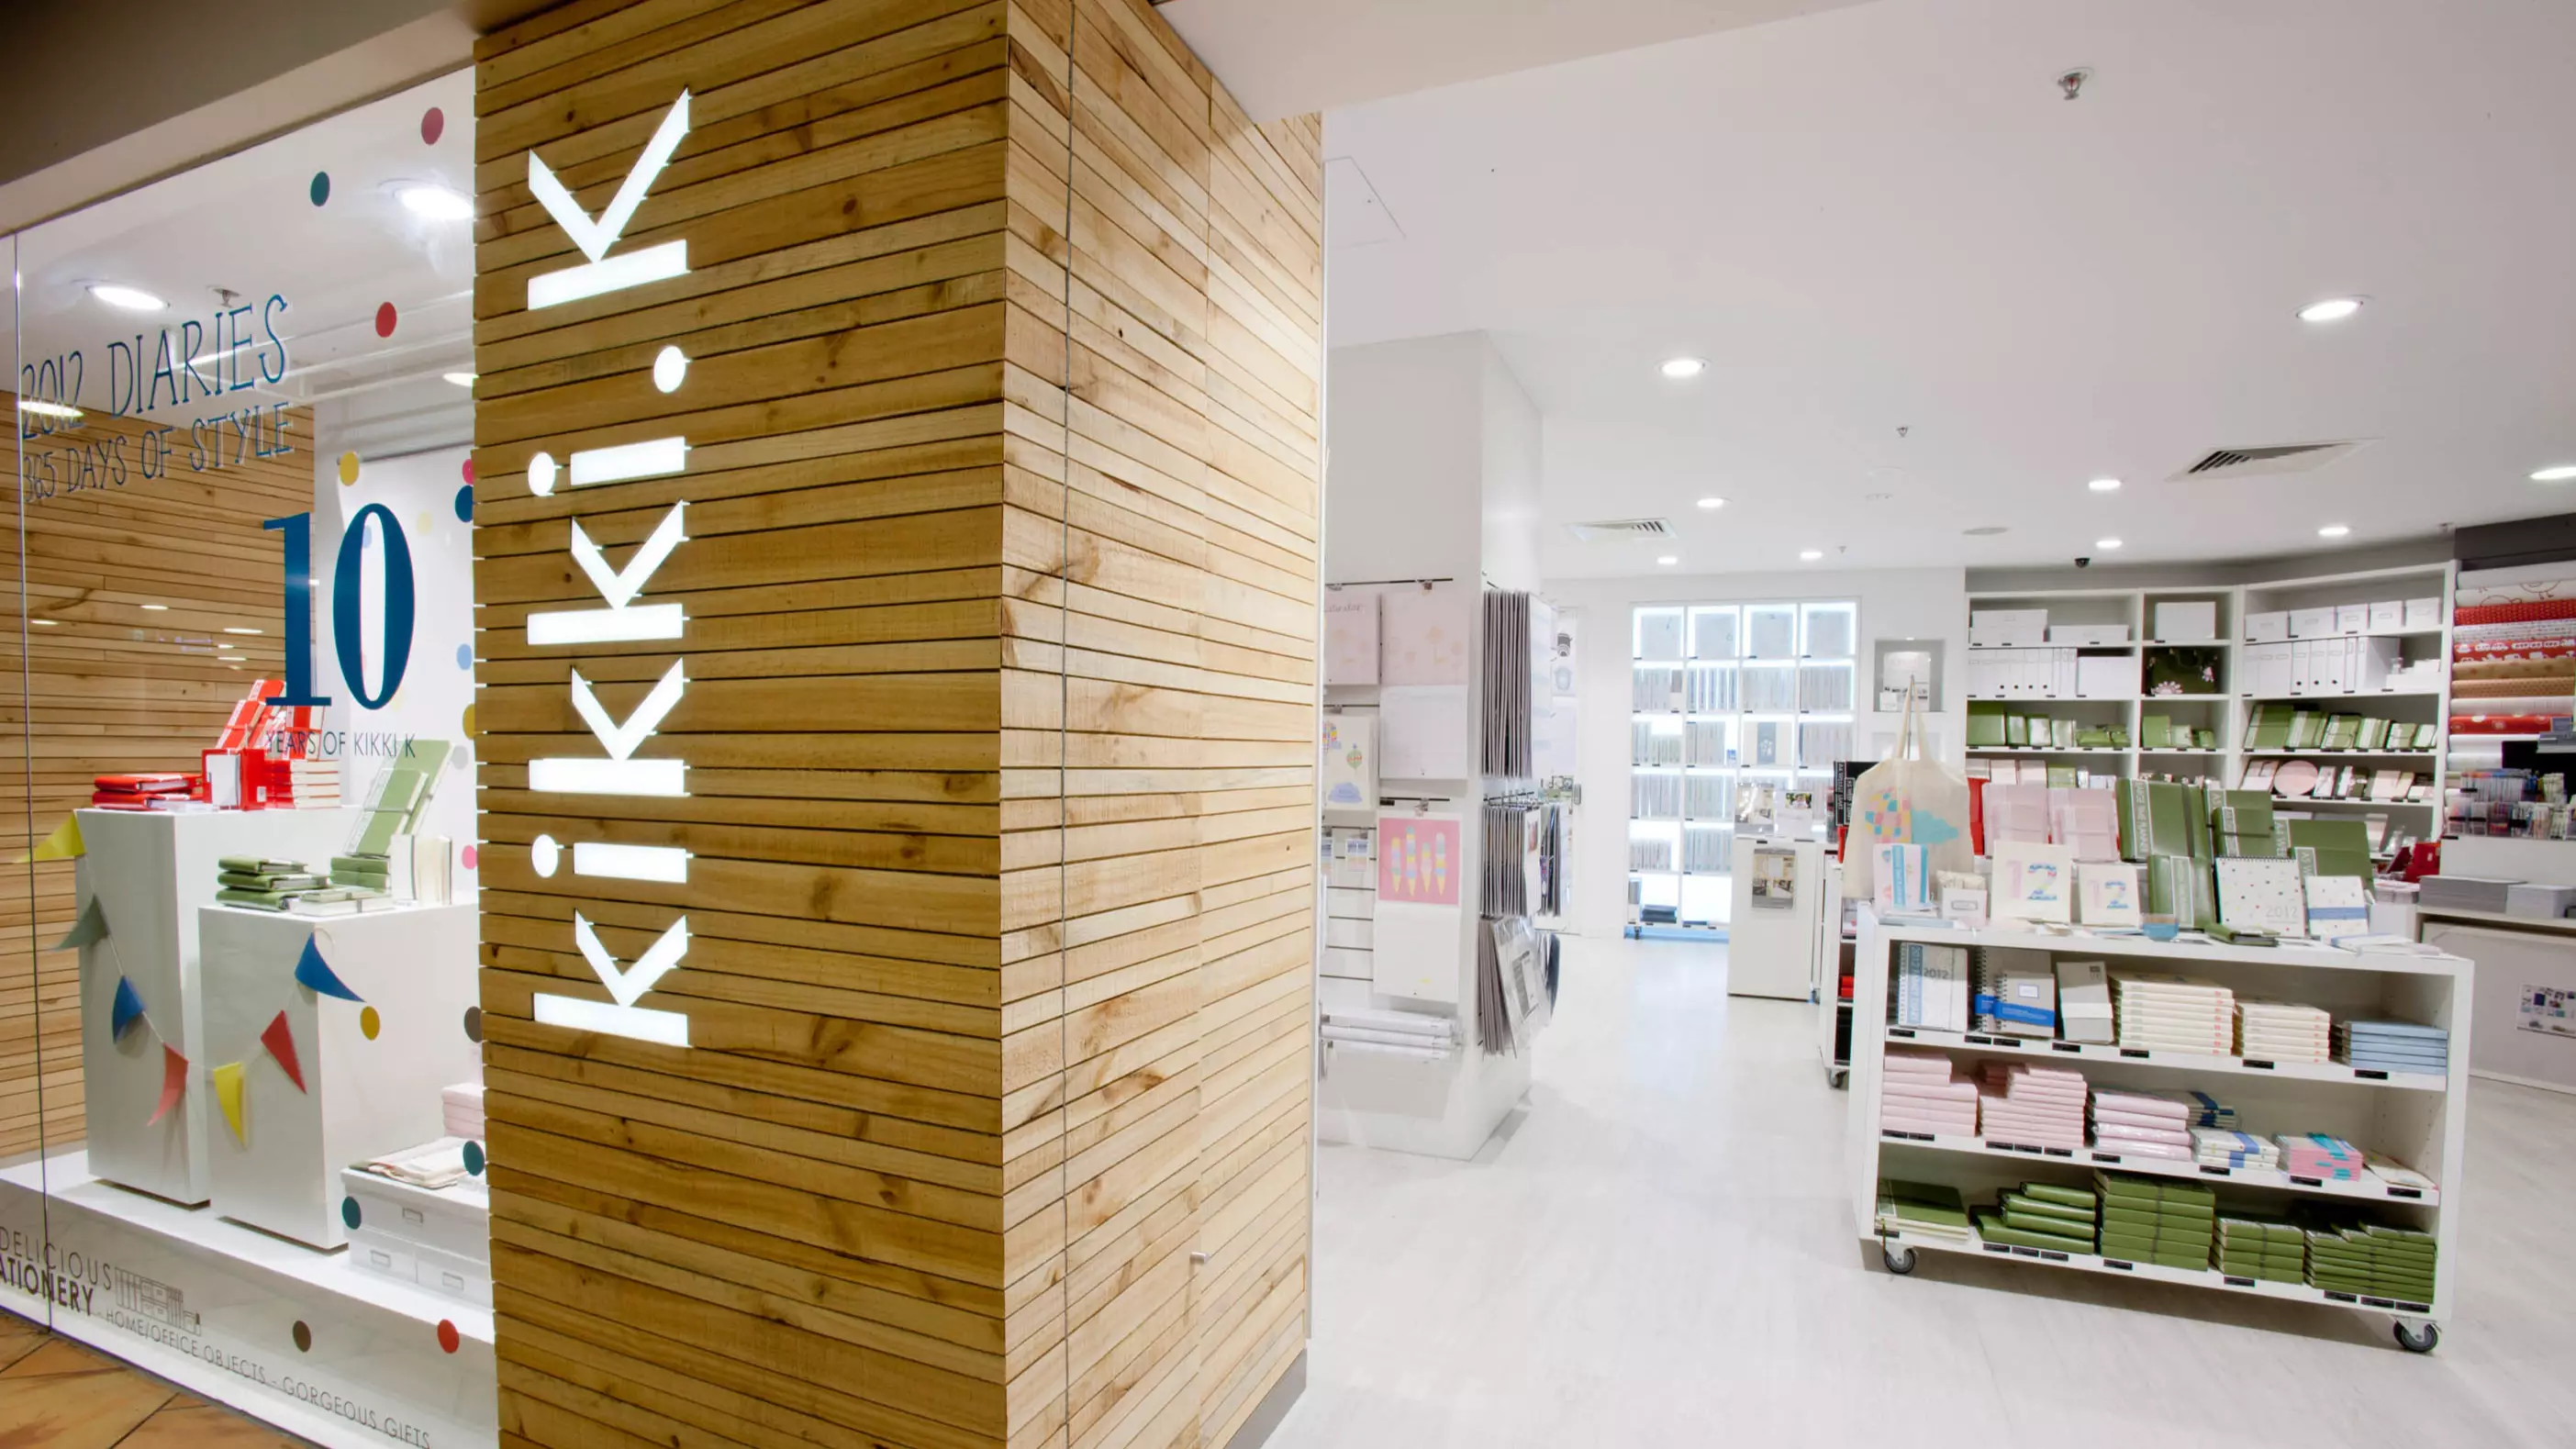 Stationery Chain kikki.K Has Collapsed Into Administration